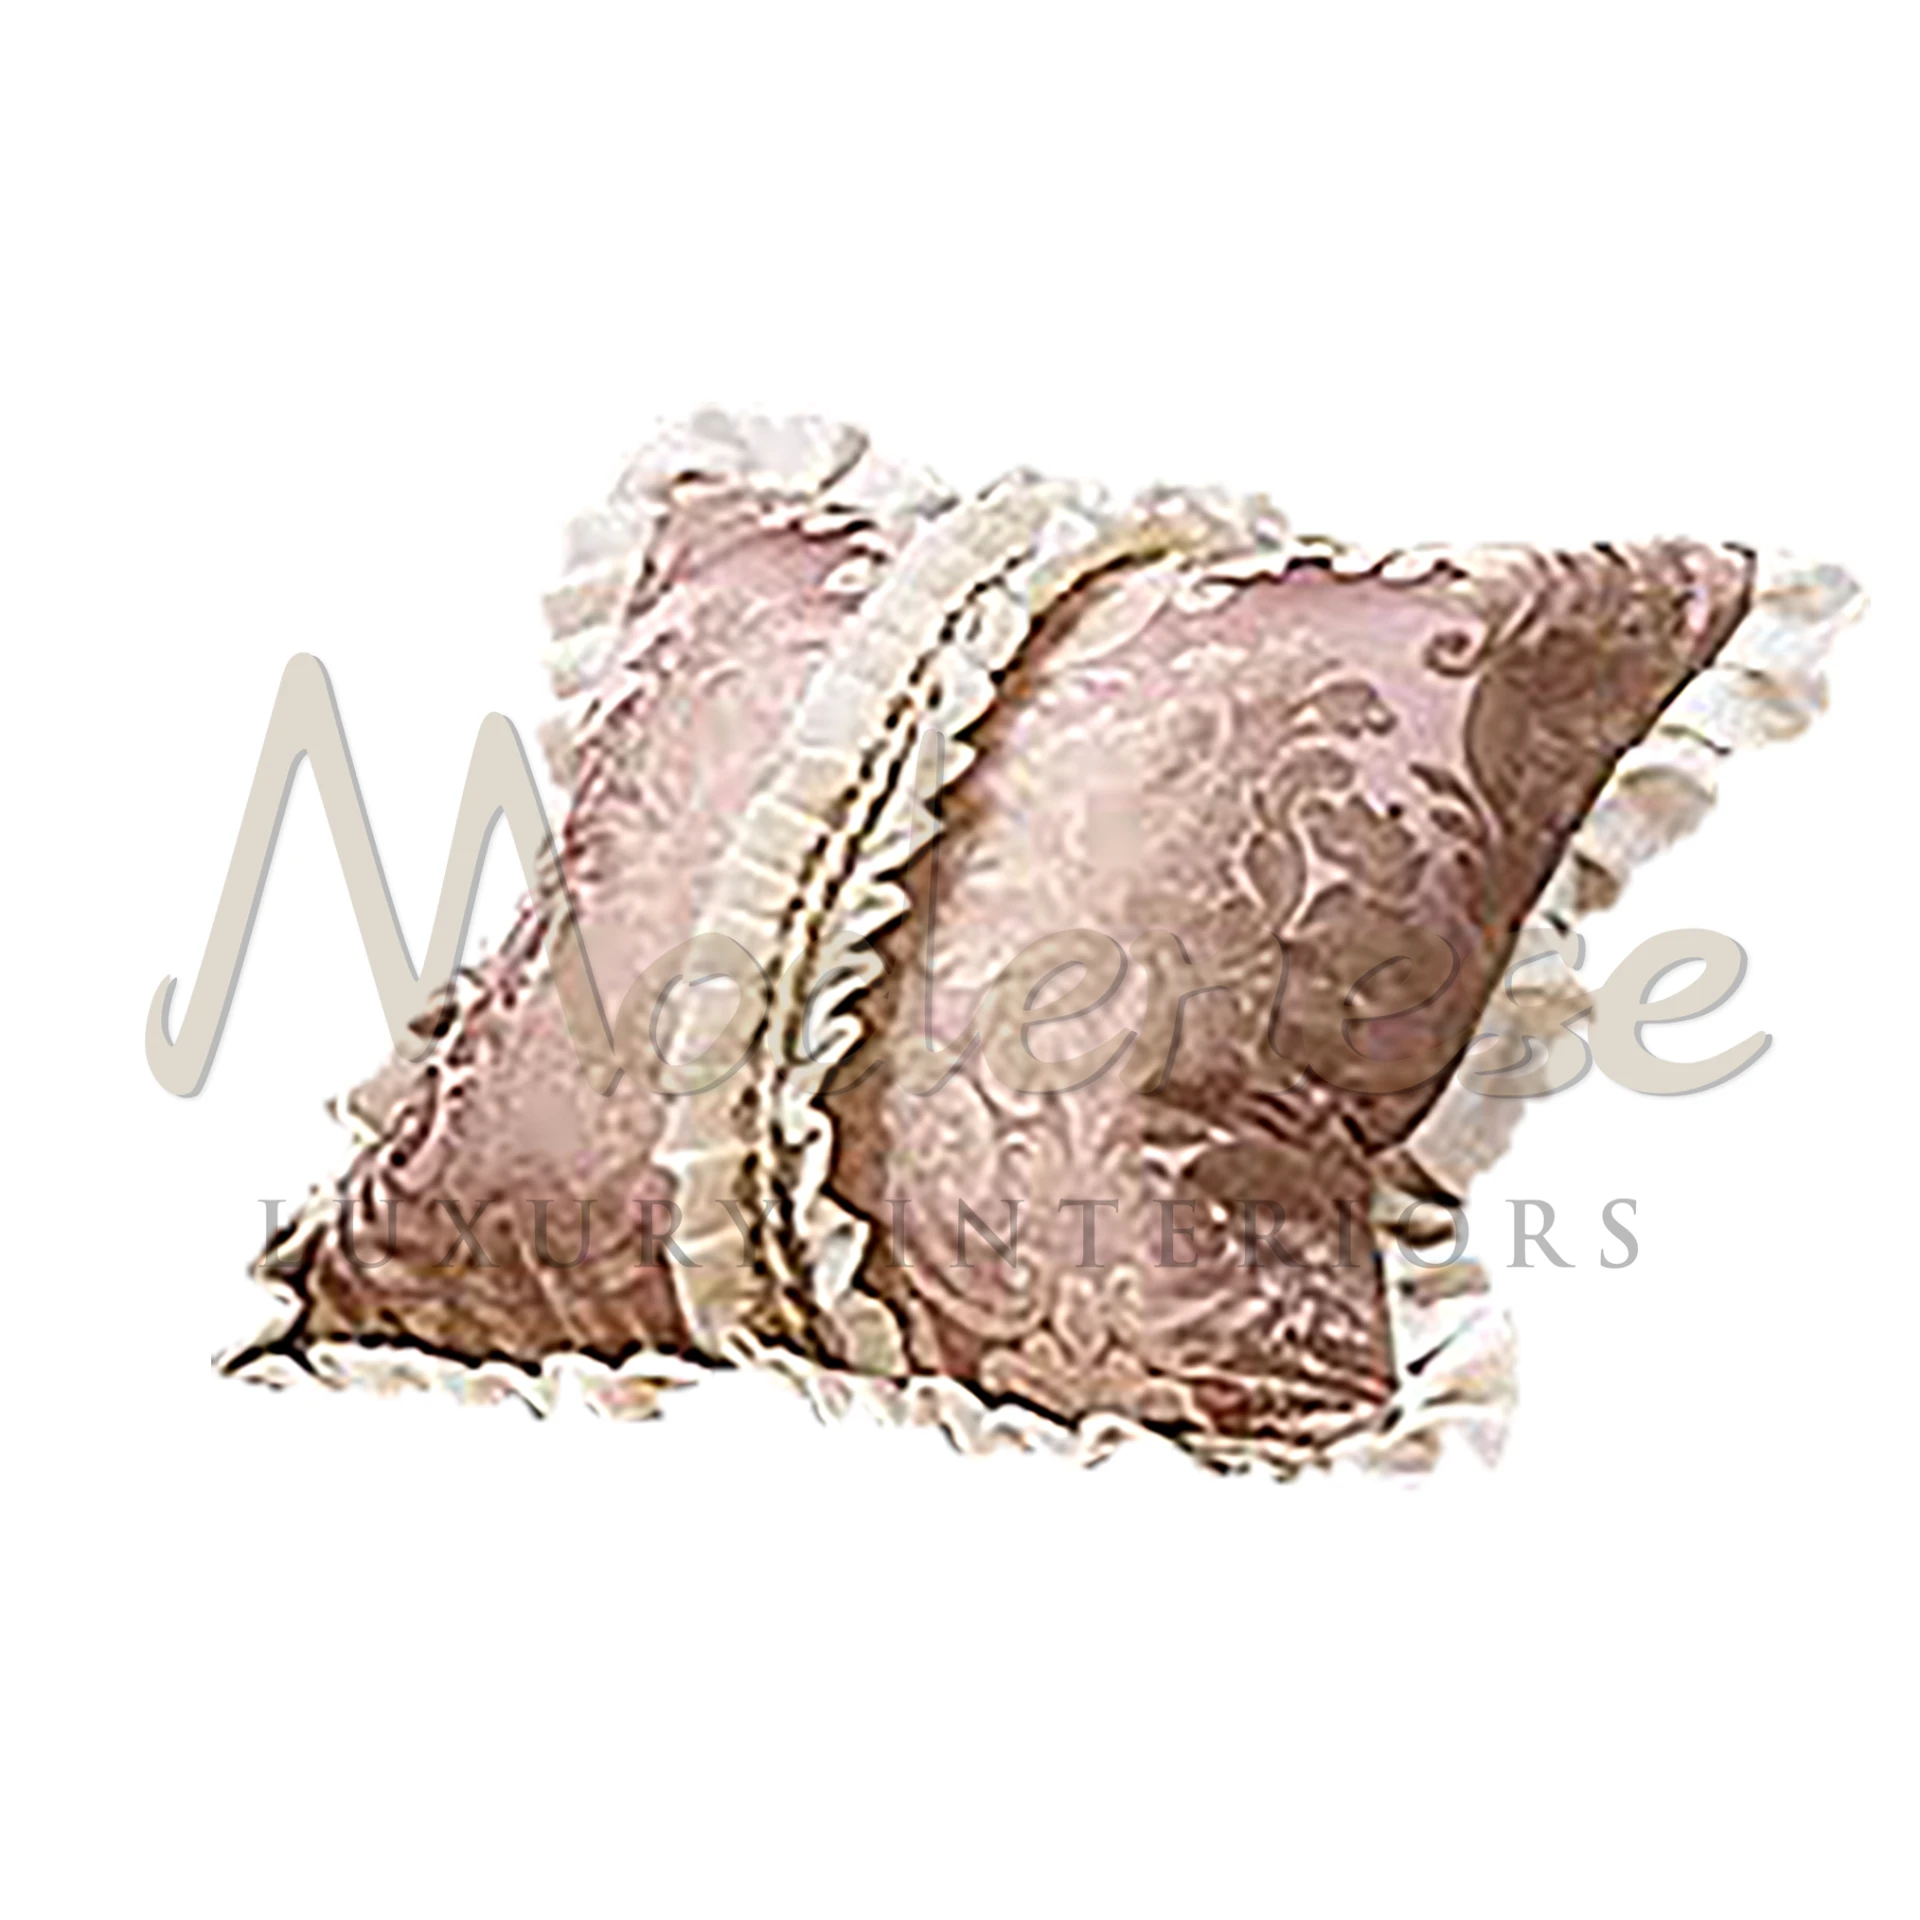 Victorian Designer Pillow, crafted with high-quality materials, offering comfort, durability, and a soft, inviting feel in luxury decor.